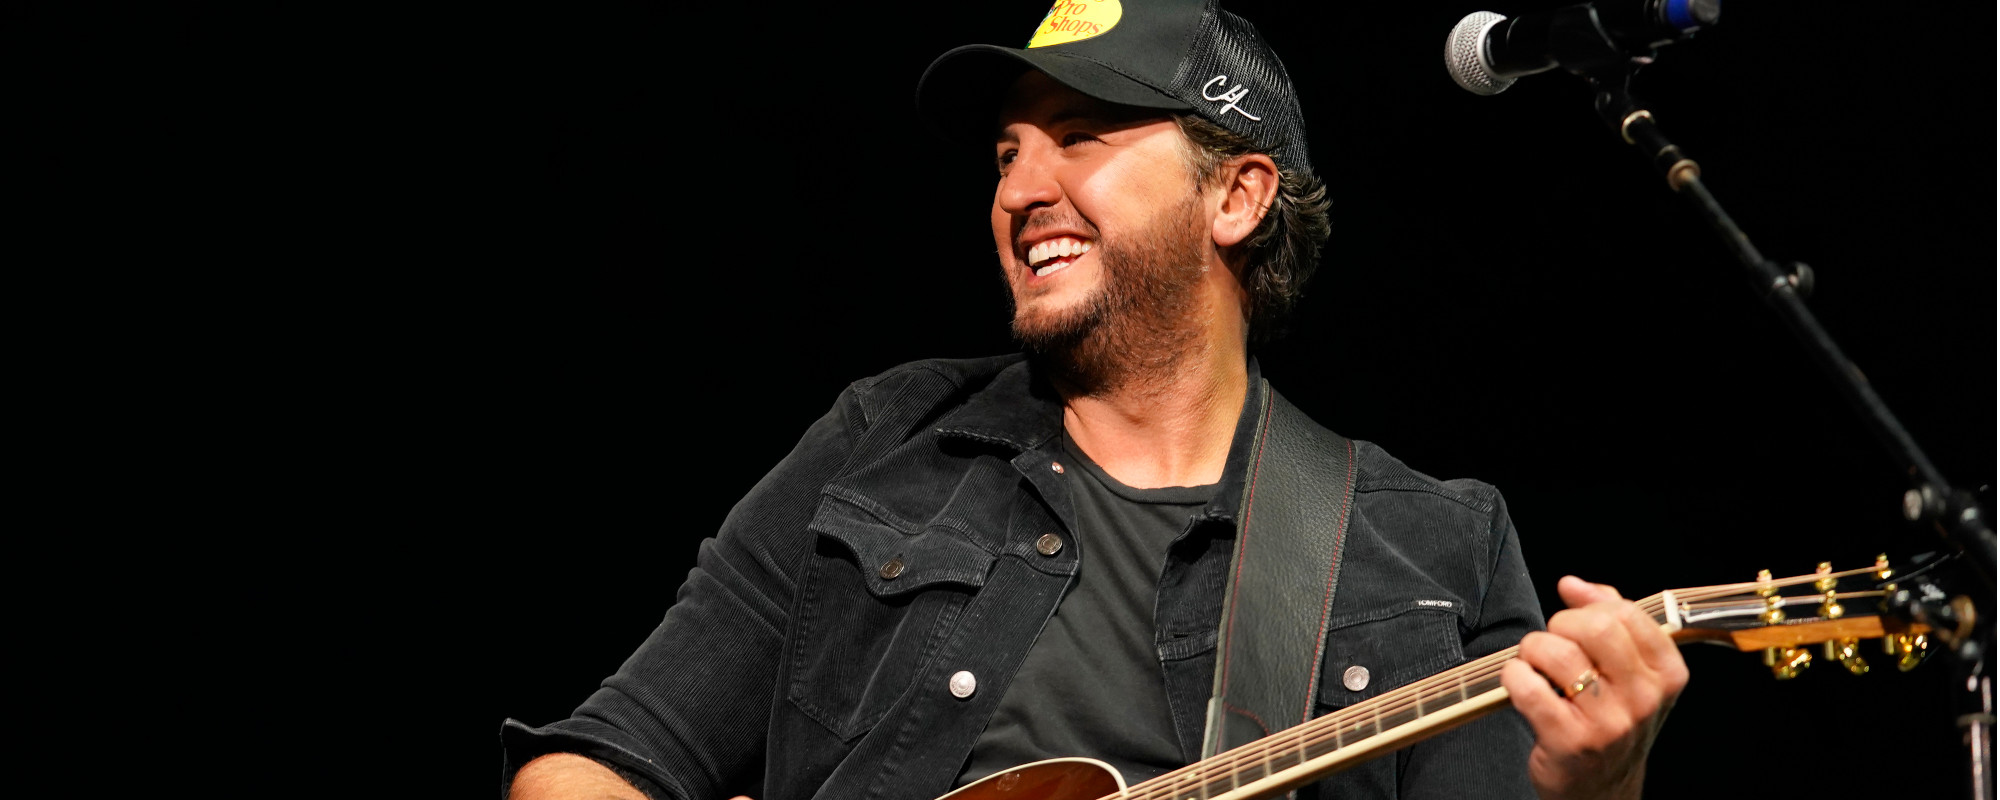 Luke Bryan Breaks Silence on Missing College Student Kicked out of His Nashville Bar